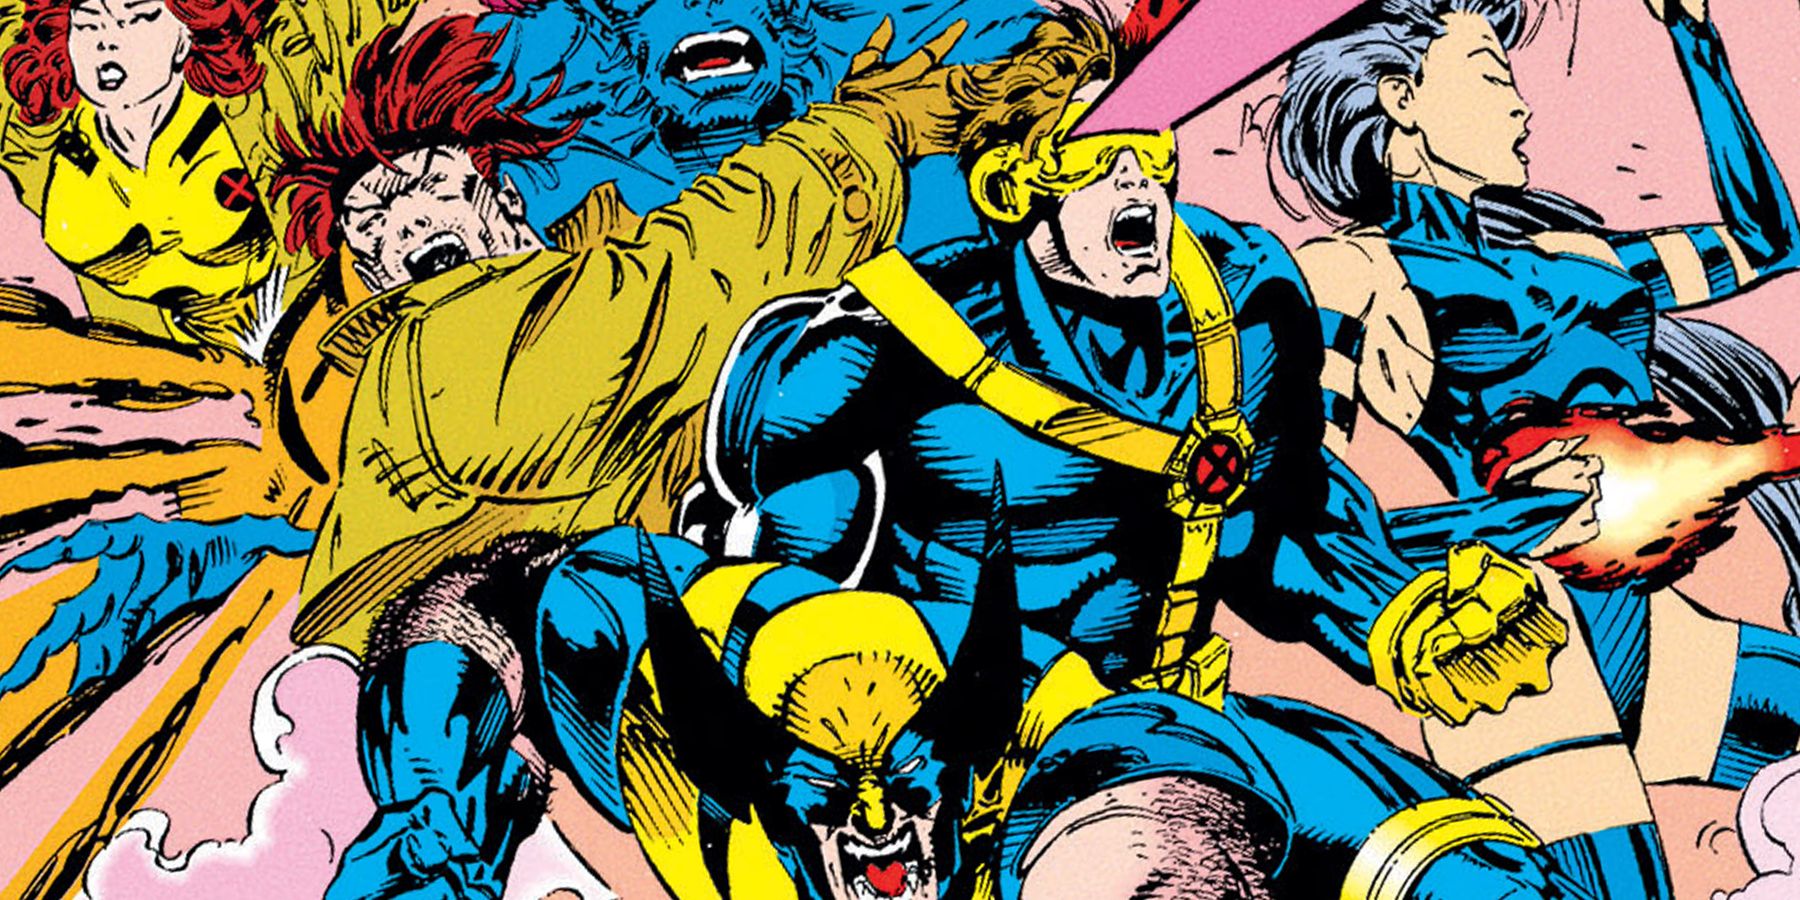 A group shot of X-men fighting in a marvel comic.